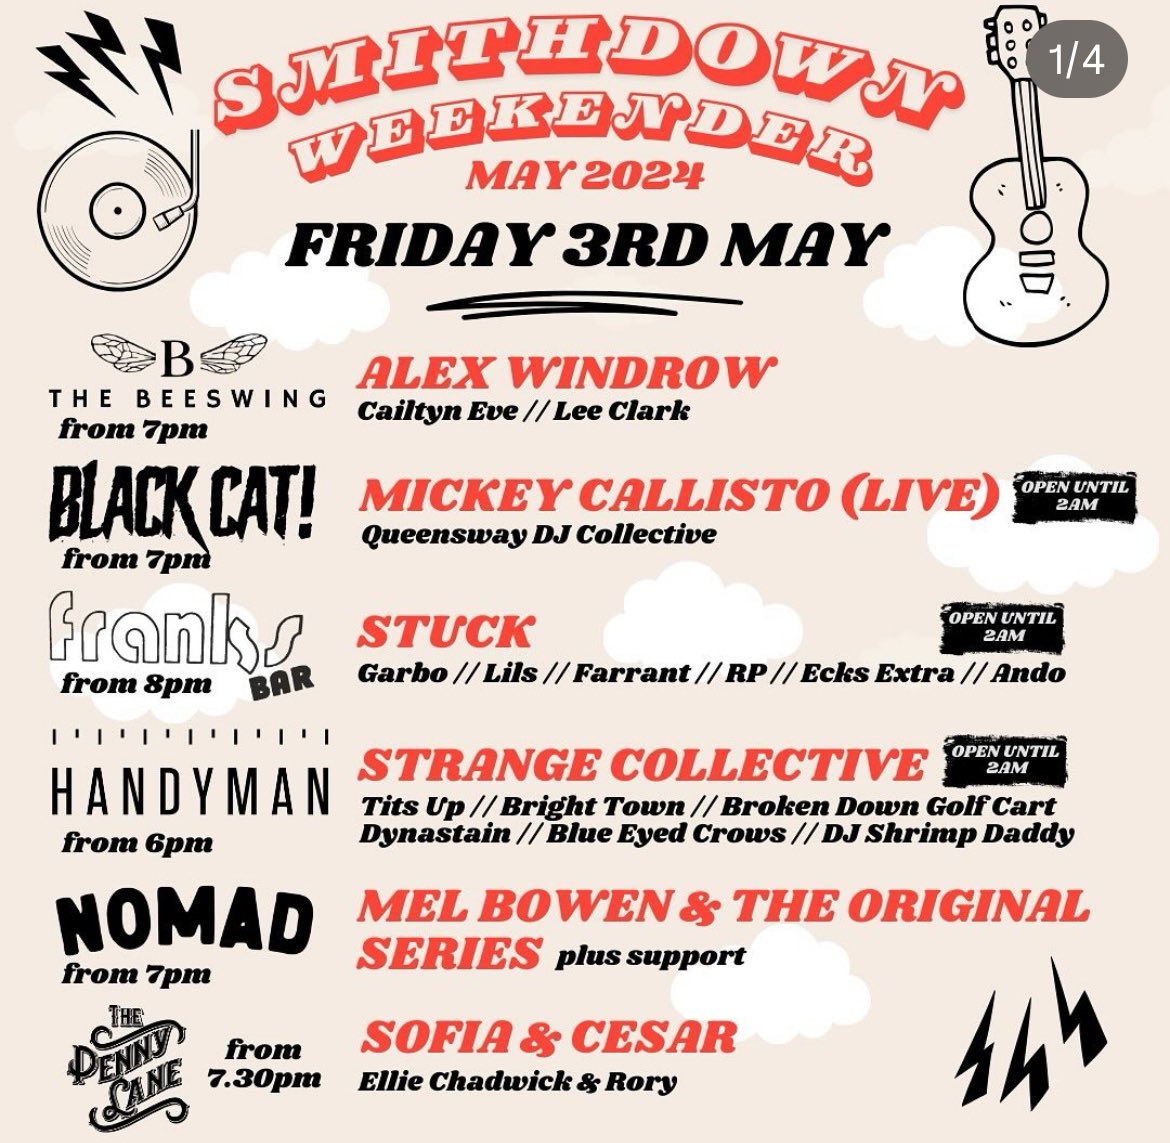 This Friday 3rd May
The Original Series 
Live at Nomad 
Smithdown Weekender 
Get in early people #radiofunk